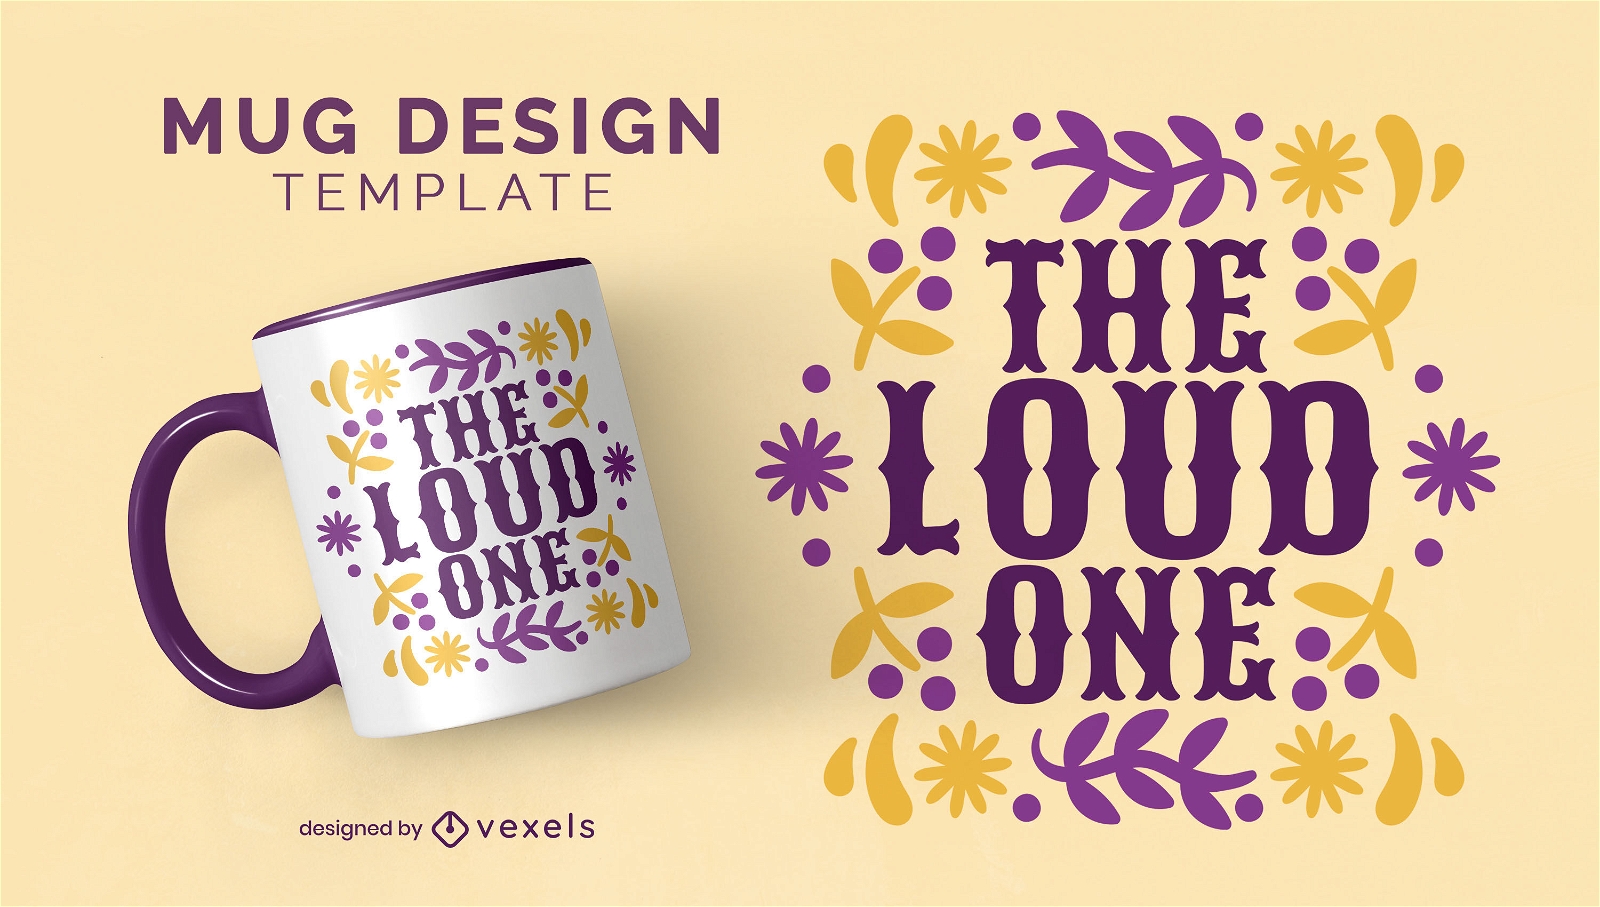 The loud one quote mug design